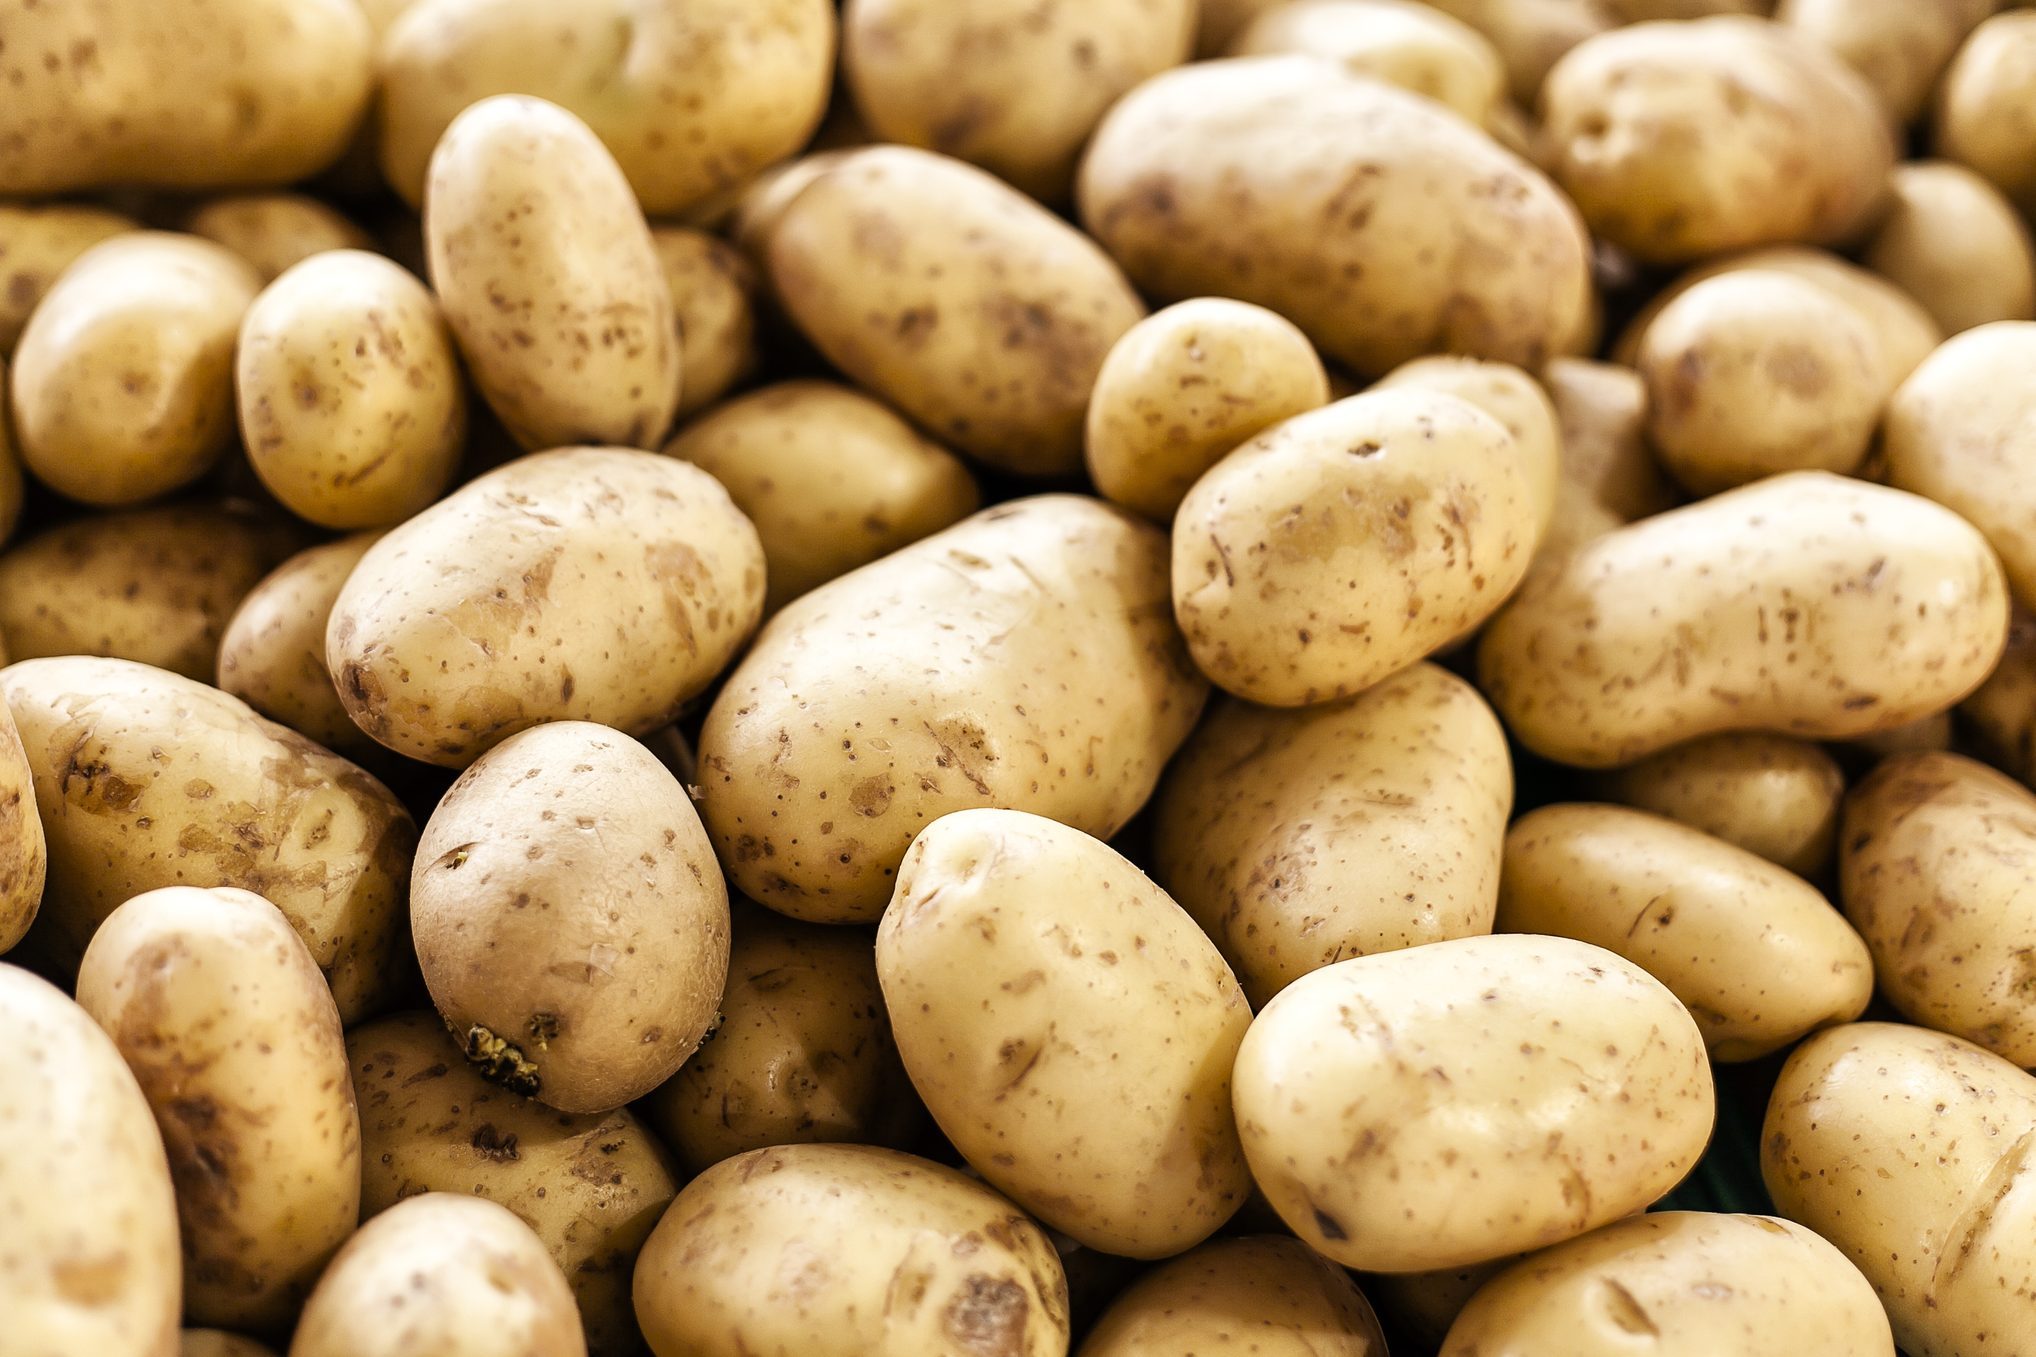 Can You Eat Raw Potatoes, or Do Potatoes Need to Be Fully Cooked?